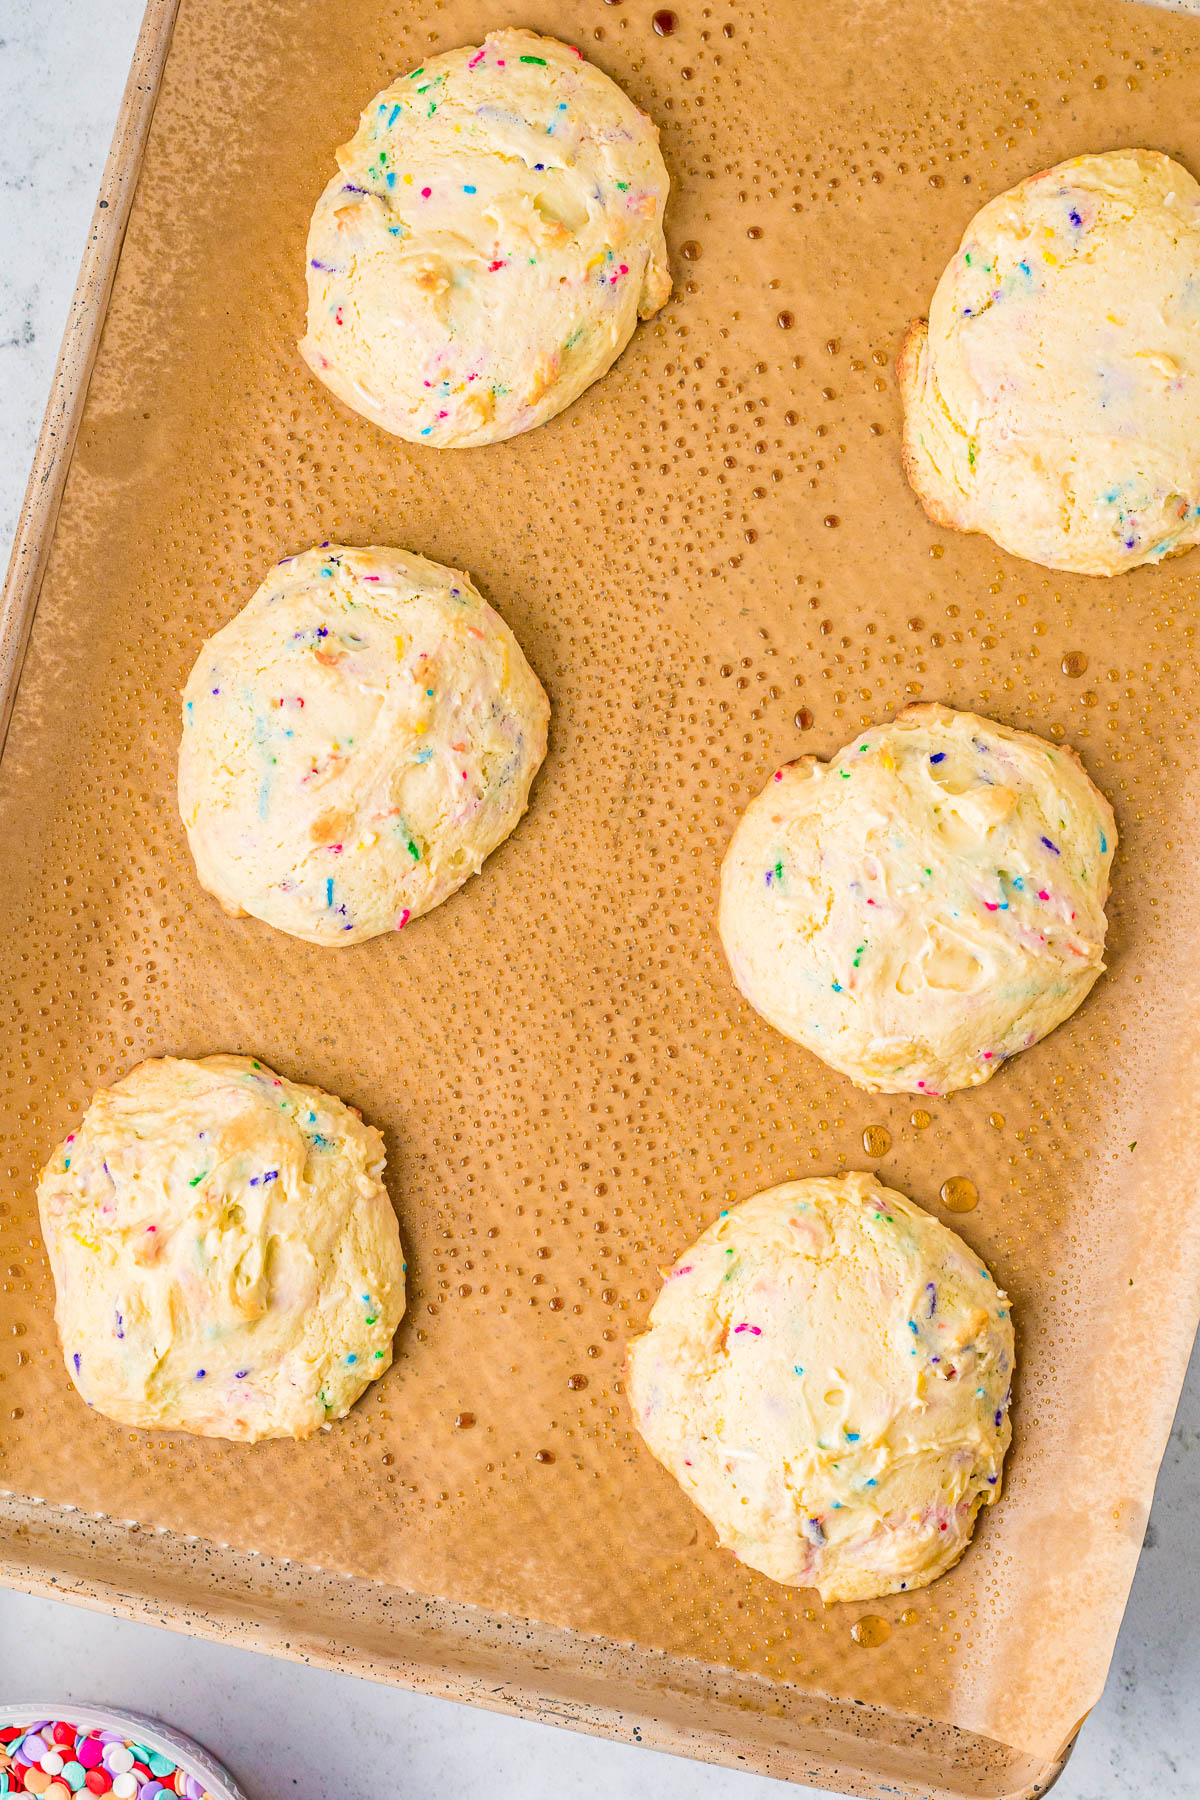 Confetti Cake Cookies (Crumbl Cookie Copycat Recipe) - Jumbo, super soft, slightly chewy cake mix cookies that are a PERFECT COPYCAT of the famous Crumbl Cookies! Loaded with rainbow and confetti sprinkles, and topped with vanilla cream cheese frosting, these are a dead ringer for the real thing!